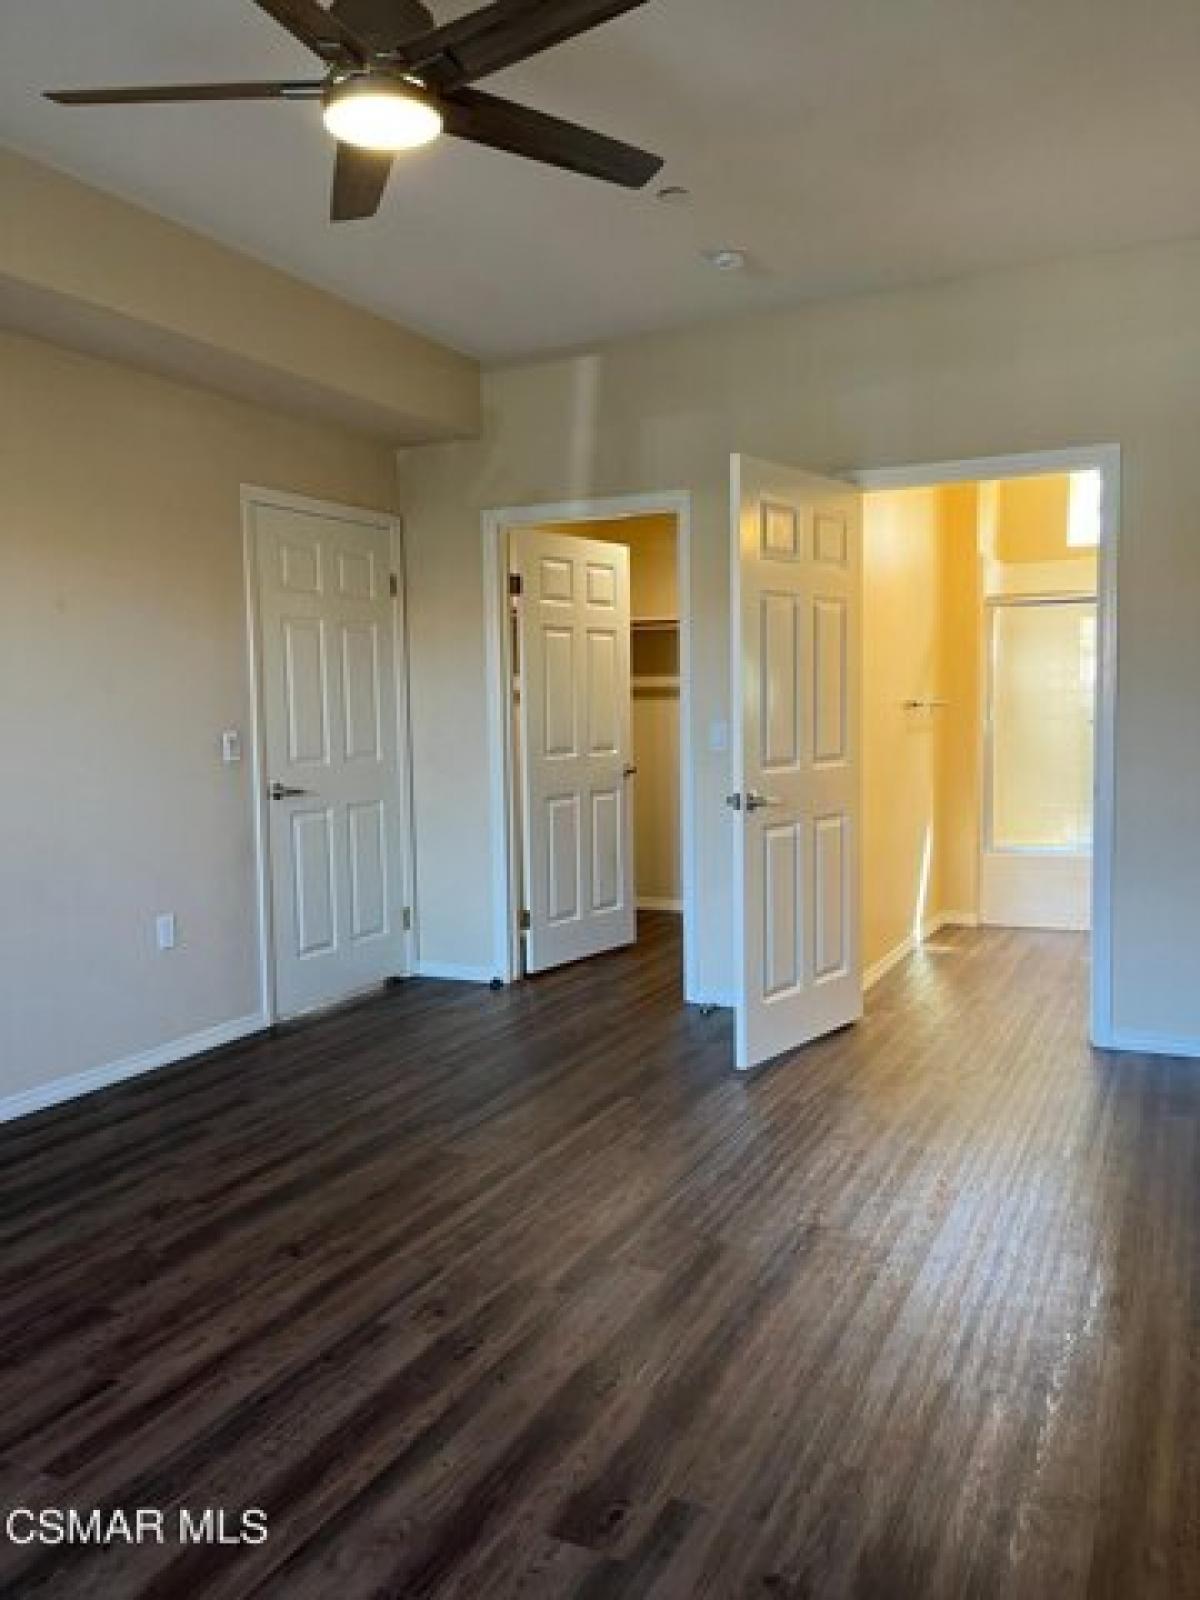 Picture of Apartment For Rent in Simi Valley, California, United States